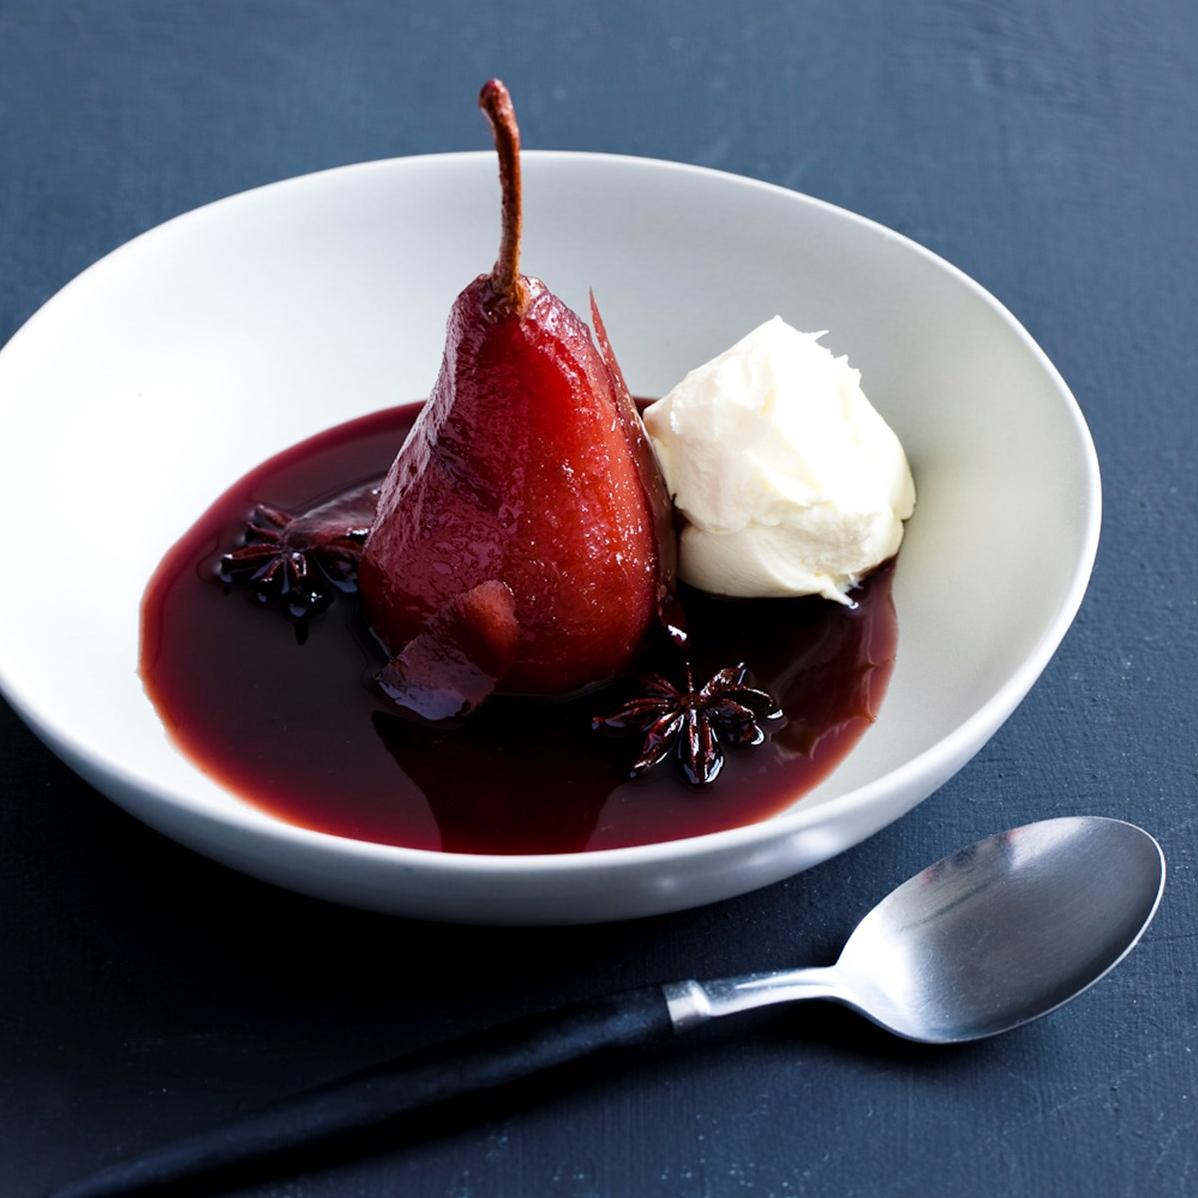  A stunningly beautiful dessert sure to impress any guest.